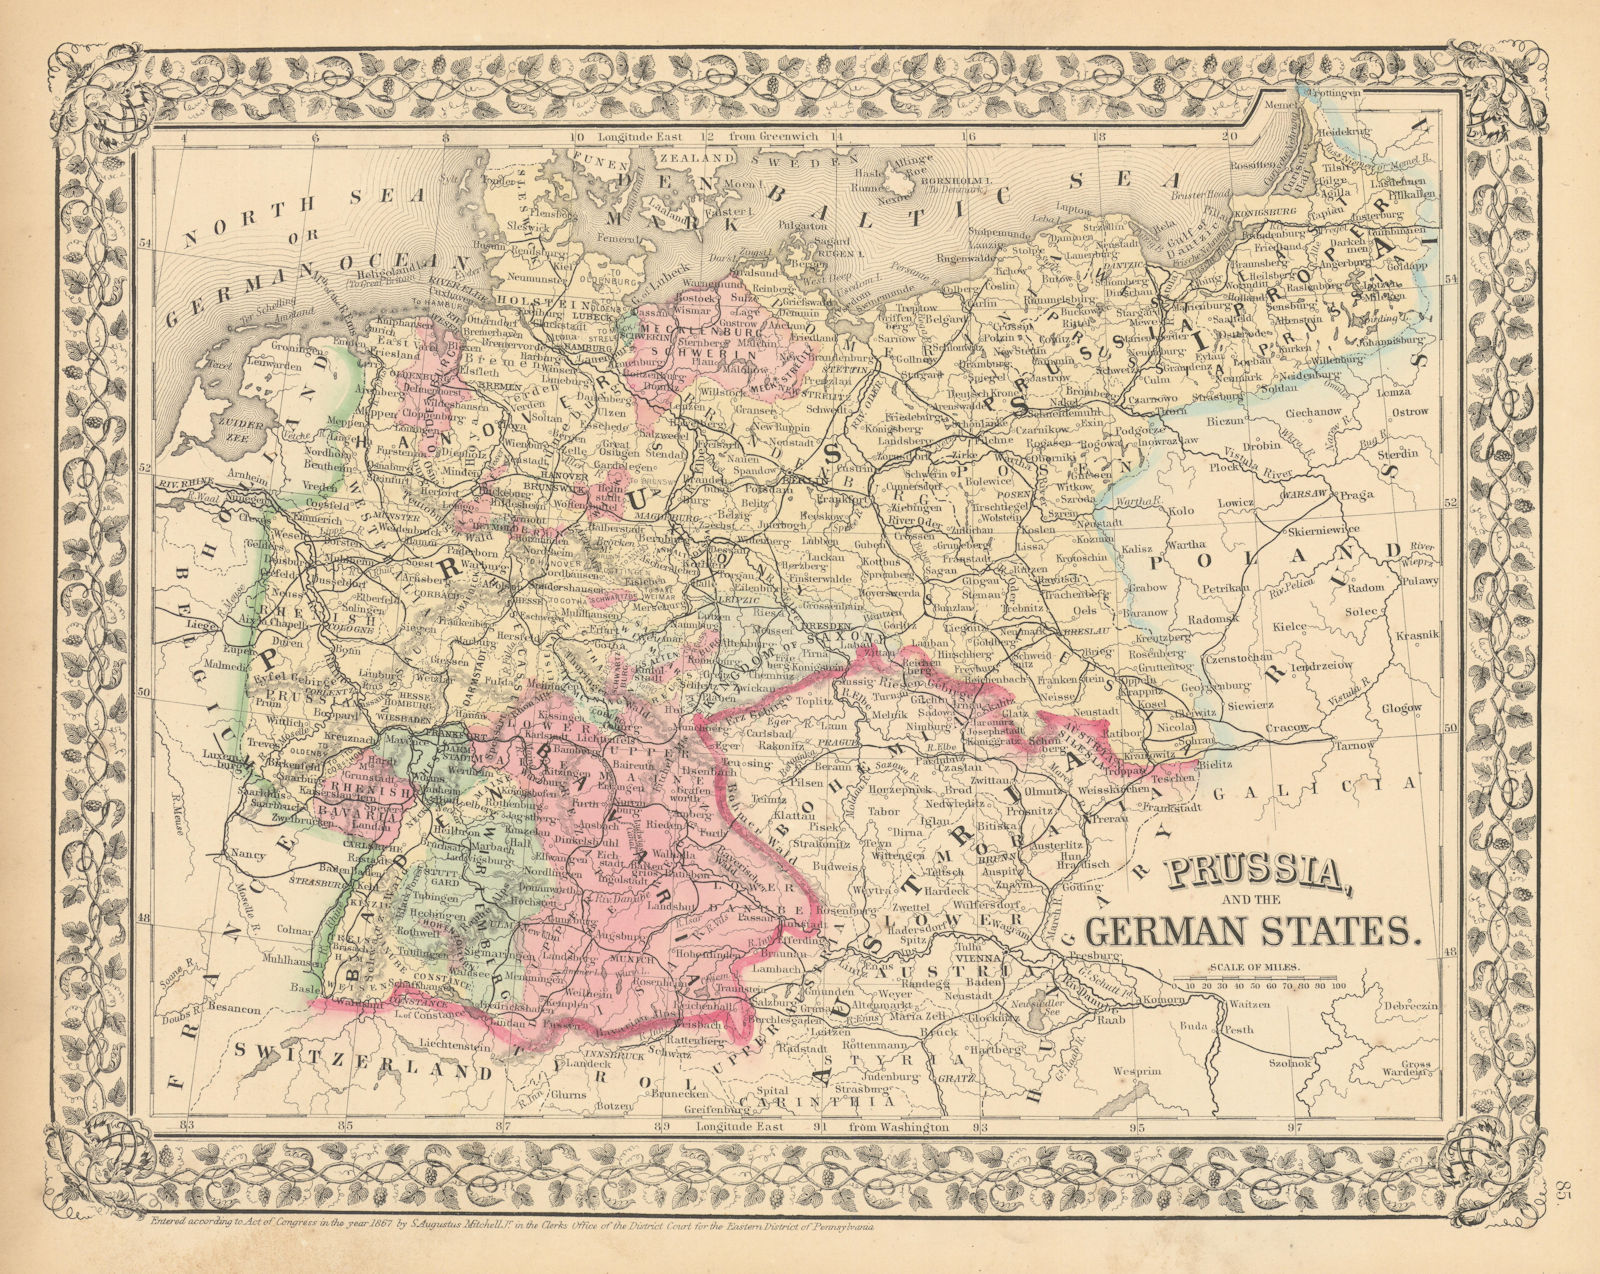 Associate Product Prussia and the German States by Samuel Augustus Mitchell. Poland 1869 old map